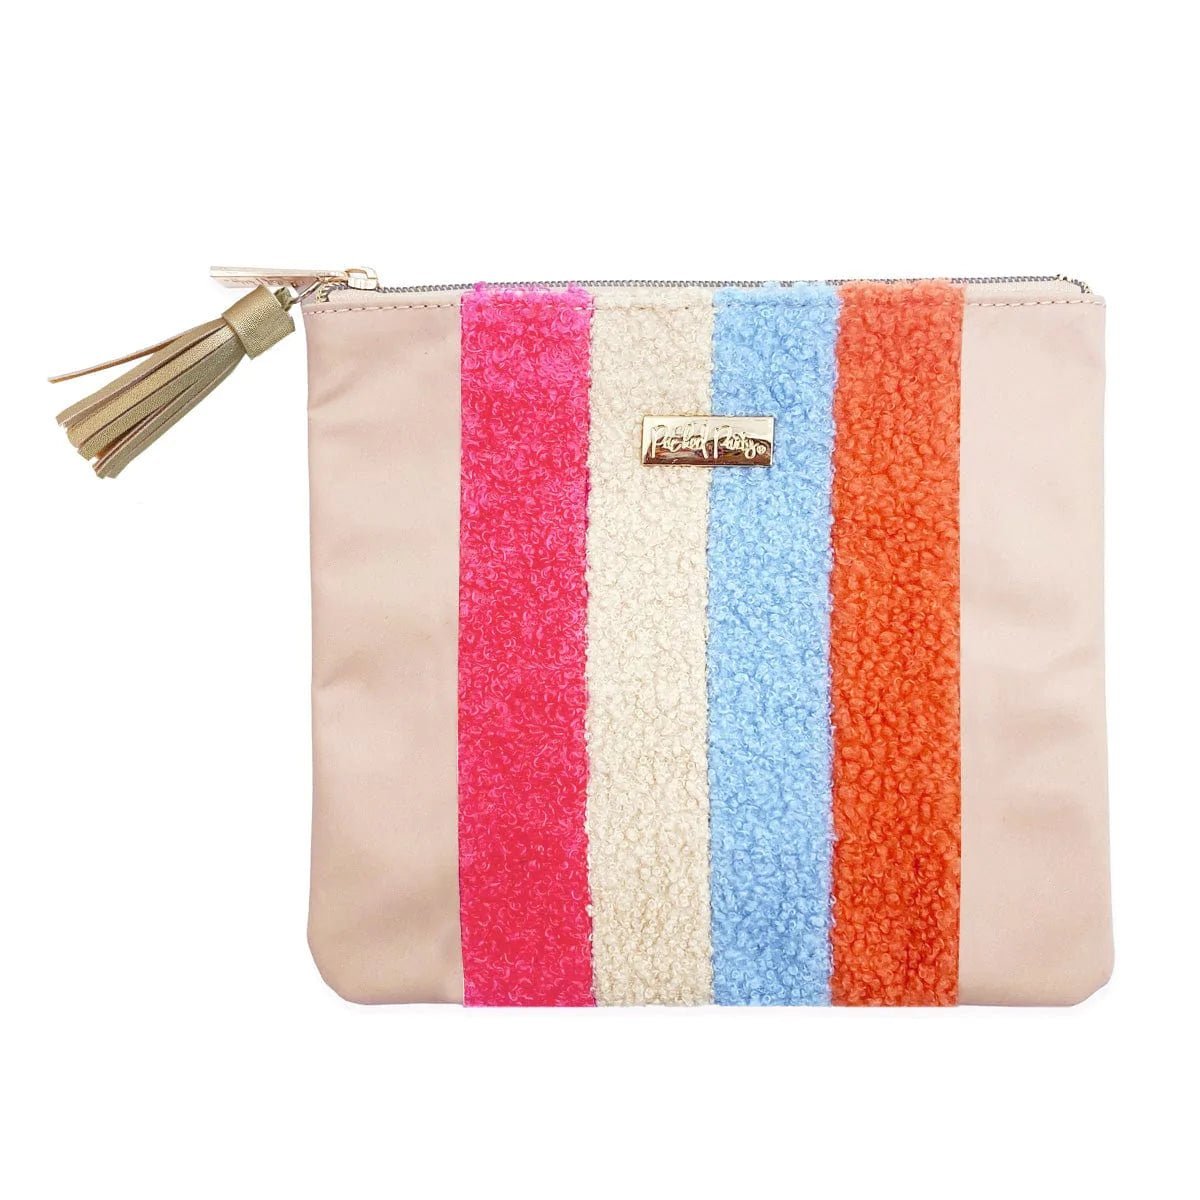 Shop Packed Party Cozy Up Everything Pouch Bag - Premium Clutch Bag from Packed Party Online now at Spoiled Brat 